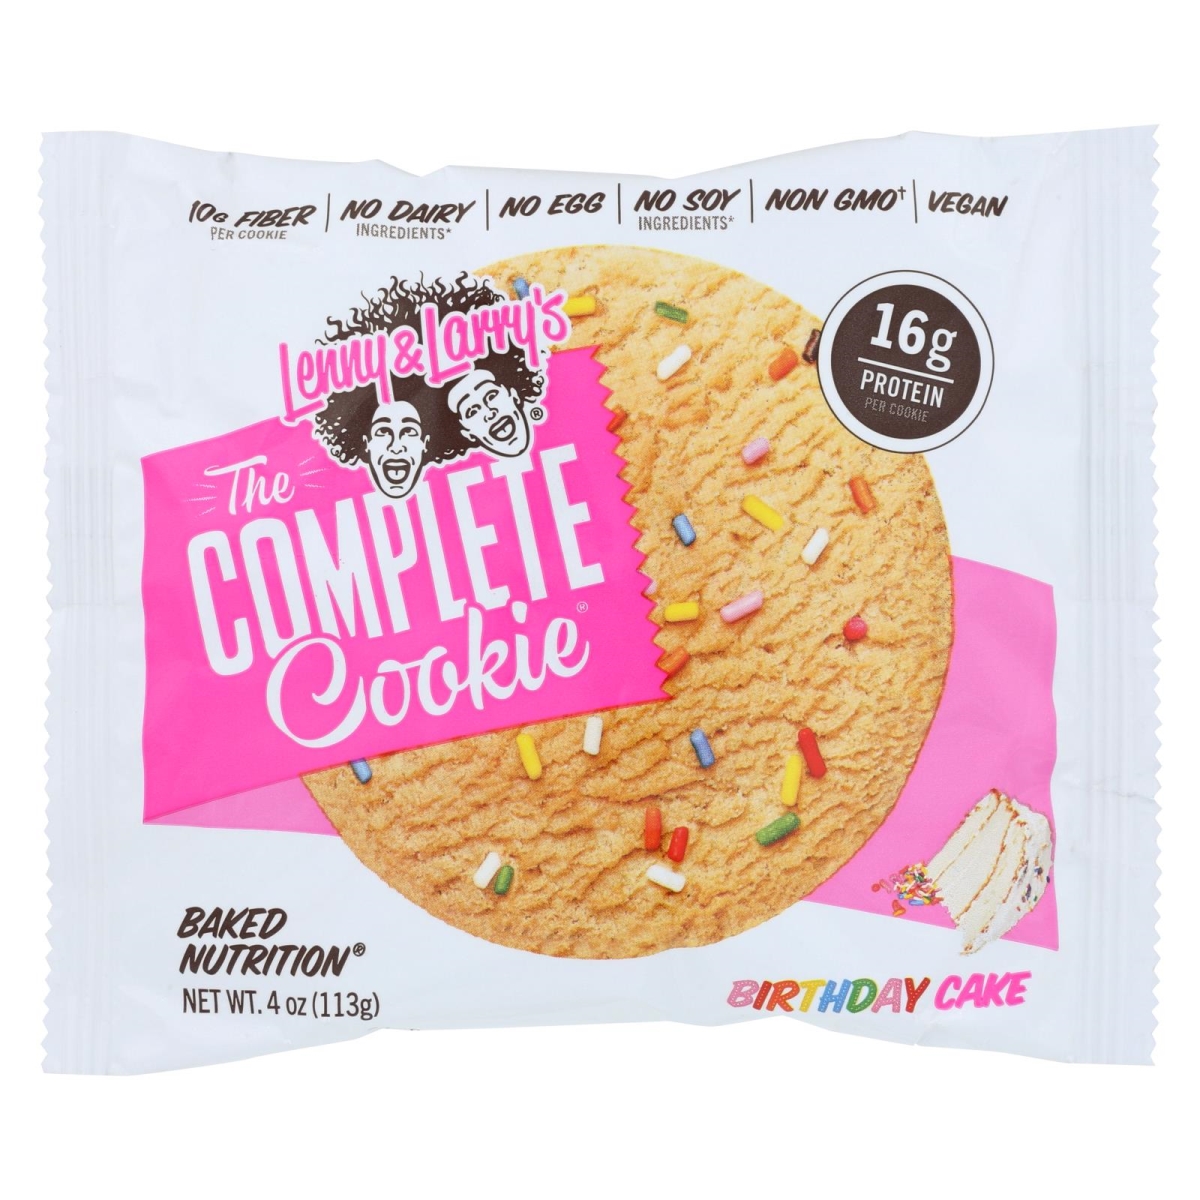 Picture of Lenny & Larrys HG1969187 4 oz The Complete Cookie Birthday Cake - Case of 12